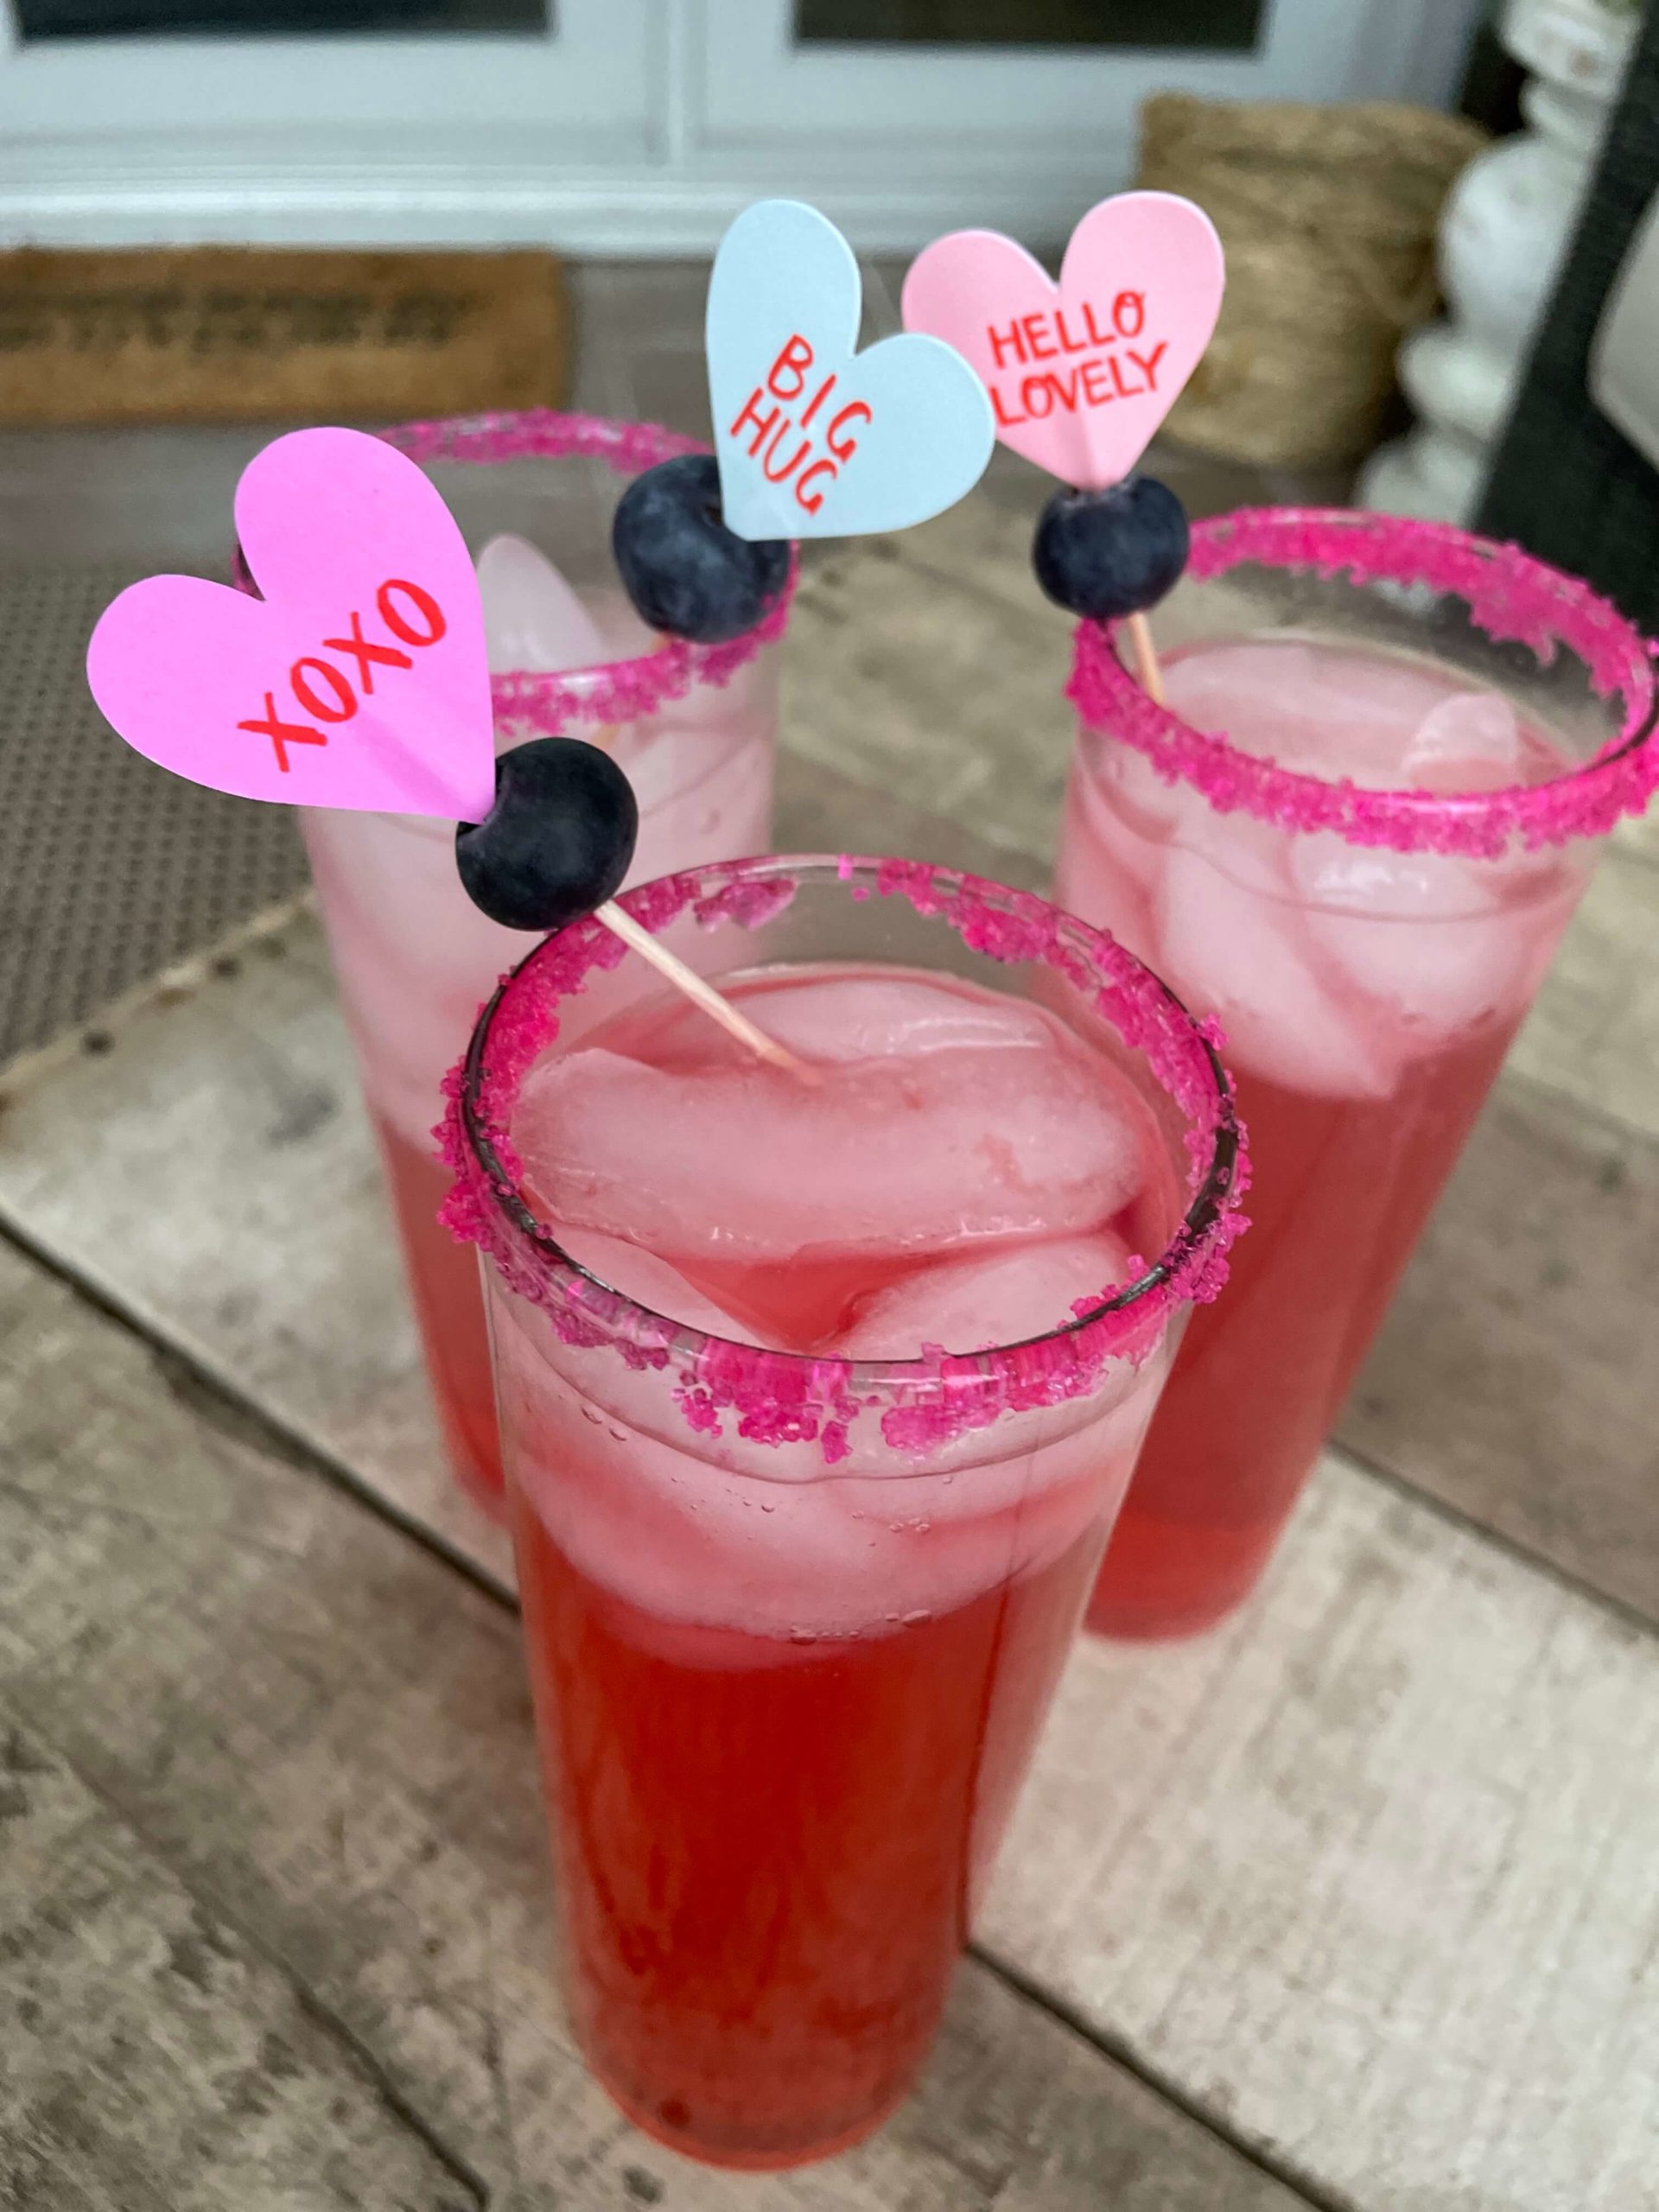 Cocktails for Galentine's Day